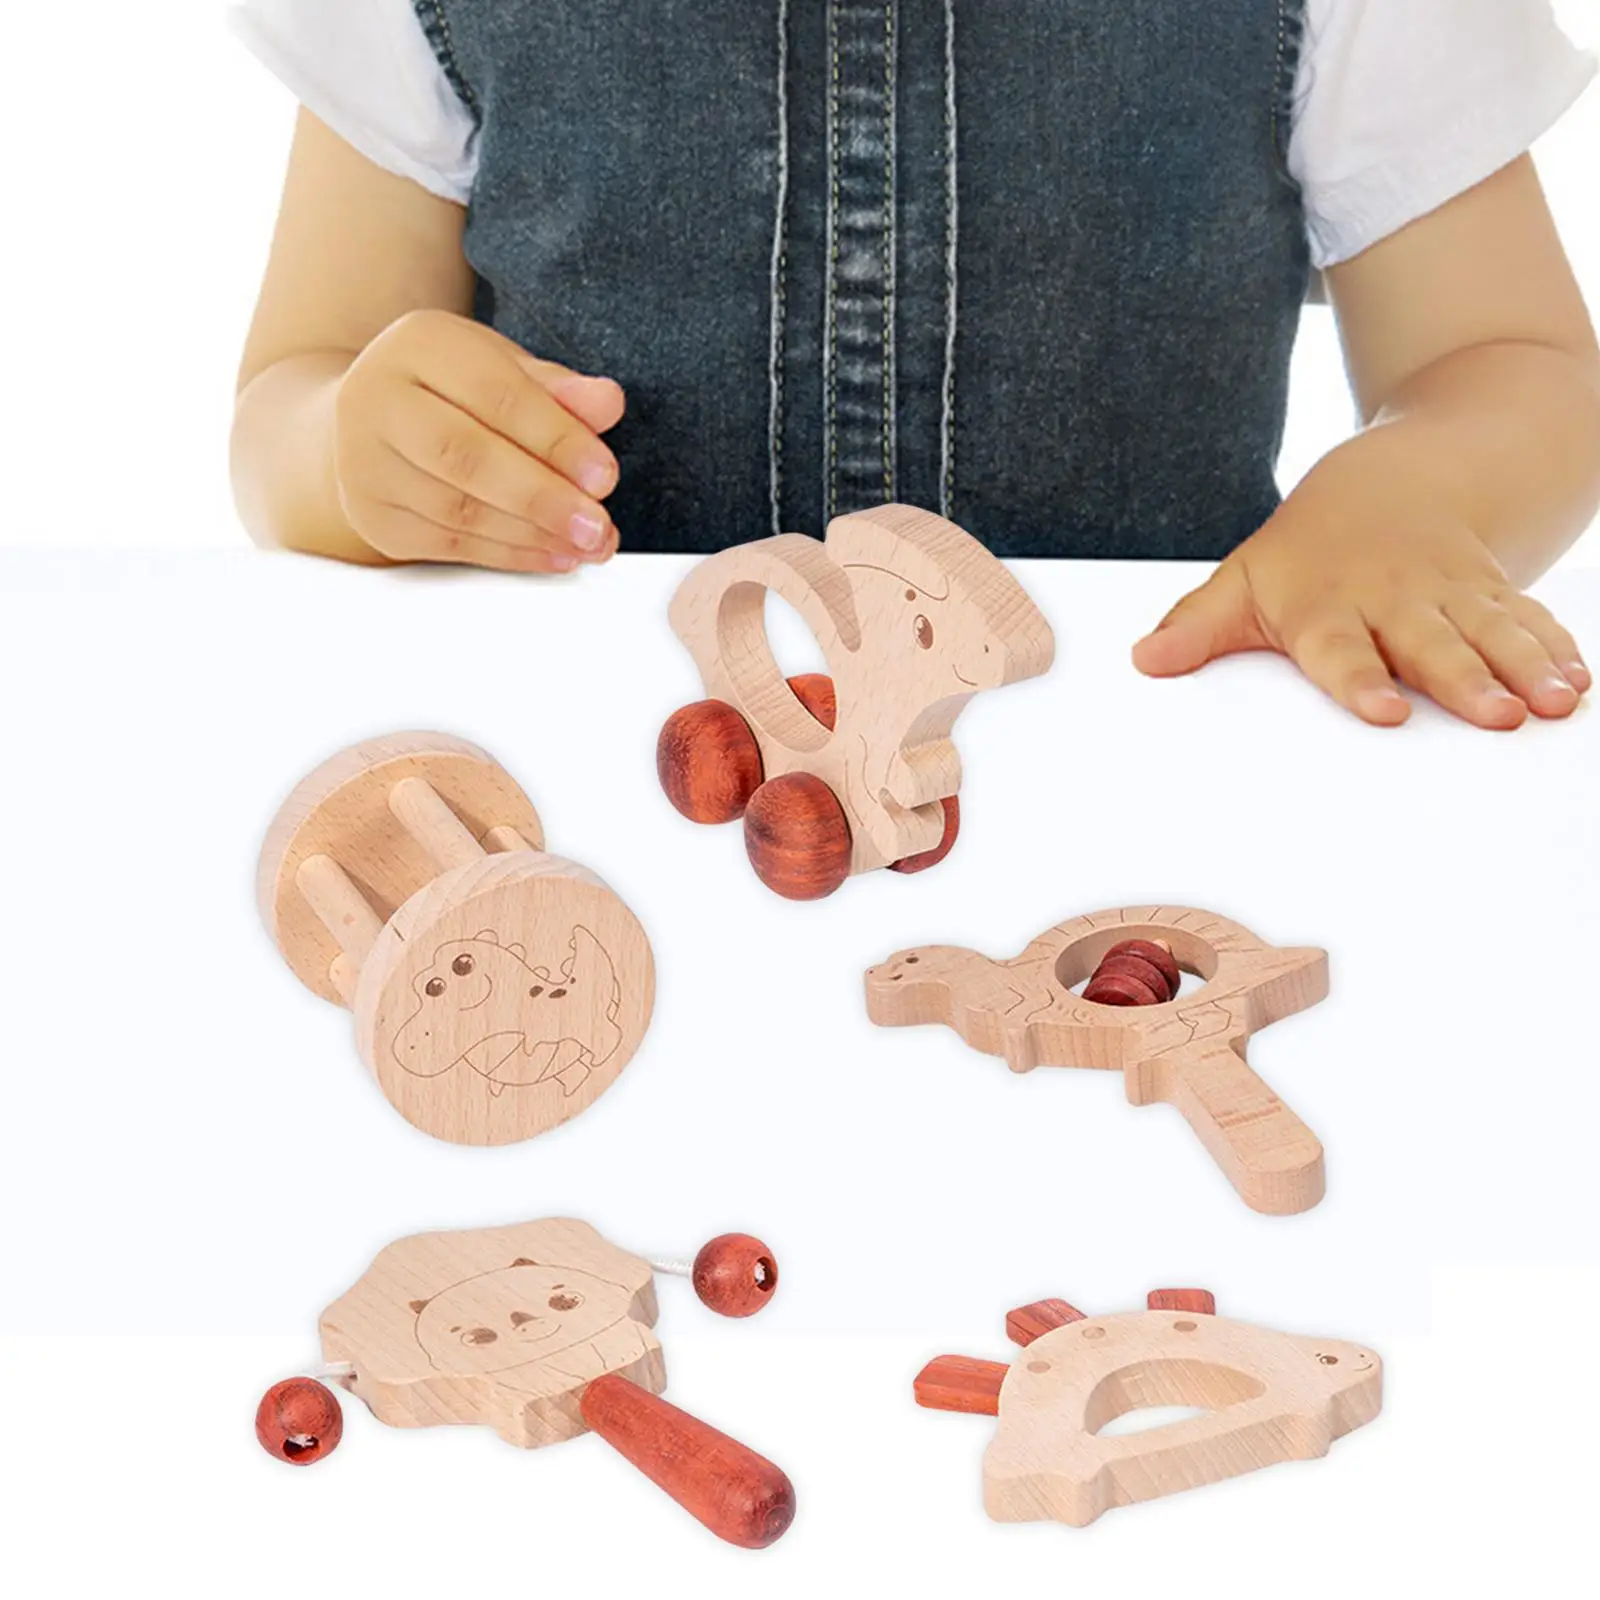 5 Pieces Wooden Baby Toys Early Learning Wood Toy Rattles Baby Rattle with Bells for Infant Babies Boys Girls 0 6 12 Months